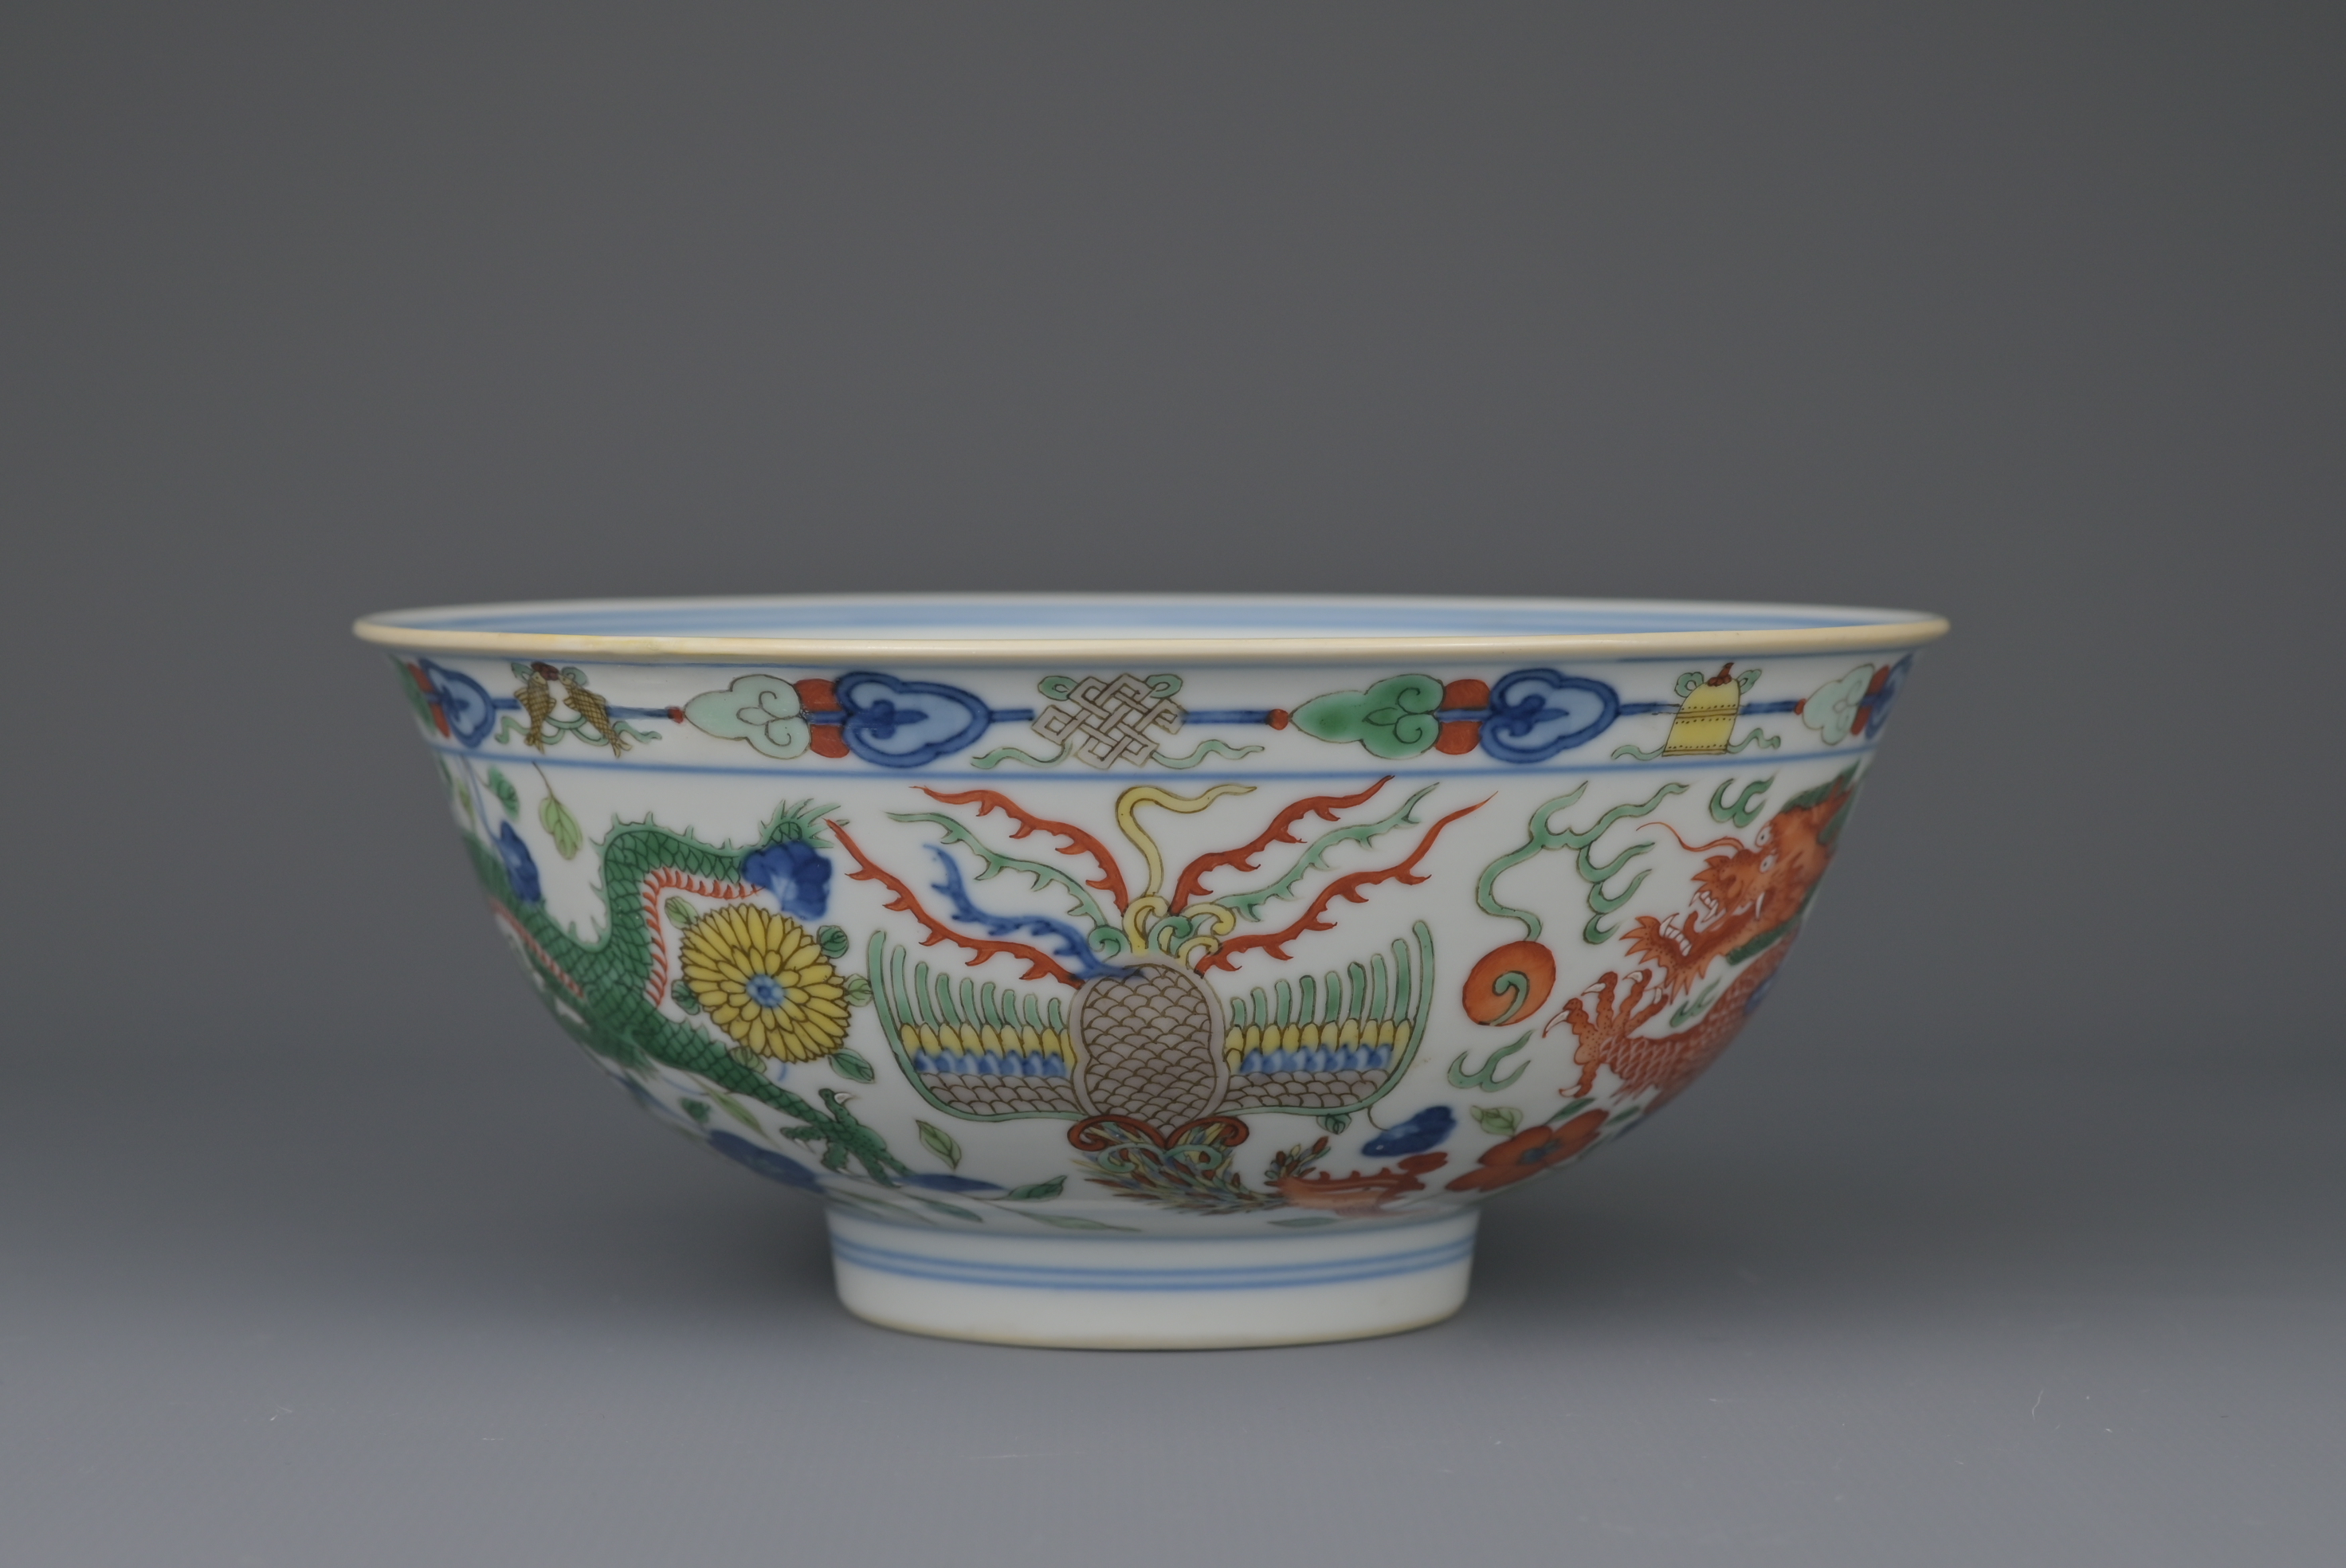 FINE CHINESE WUCAI ‘DRAGON & PHOENIX’ PORCELAIN BOWL, JIAQING MARK AND PERIOD, EARLY 19th CENTURY - Image 6 of 14